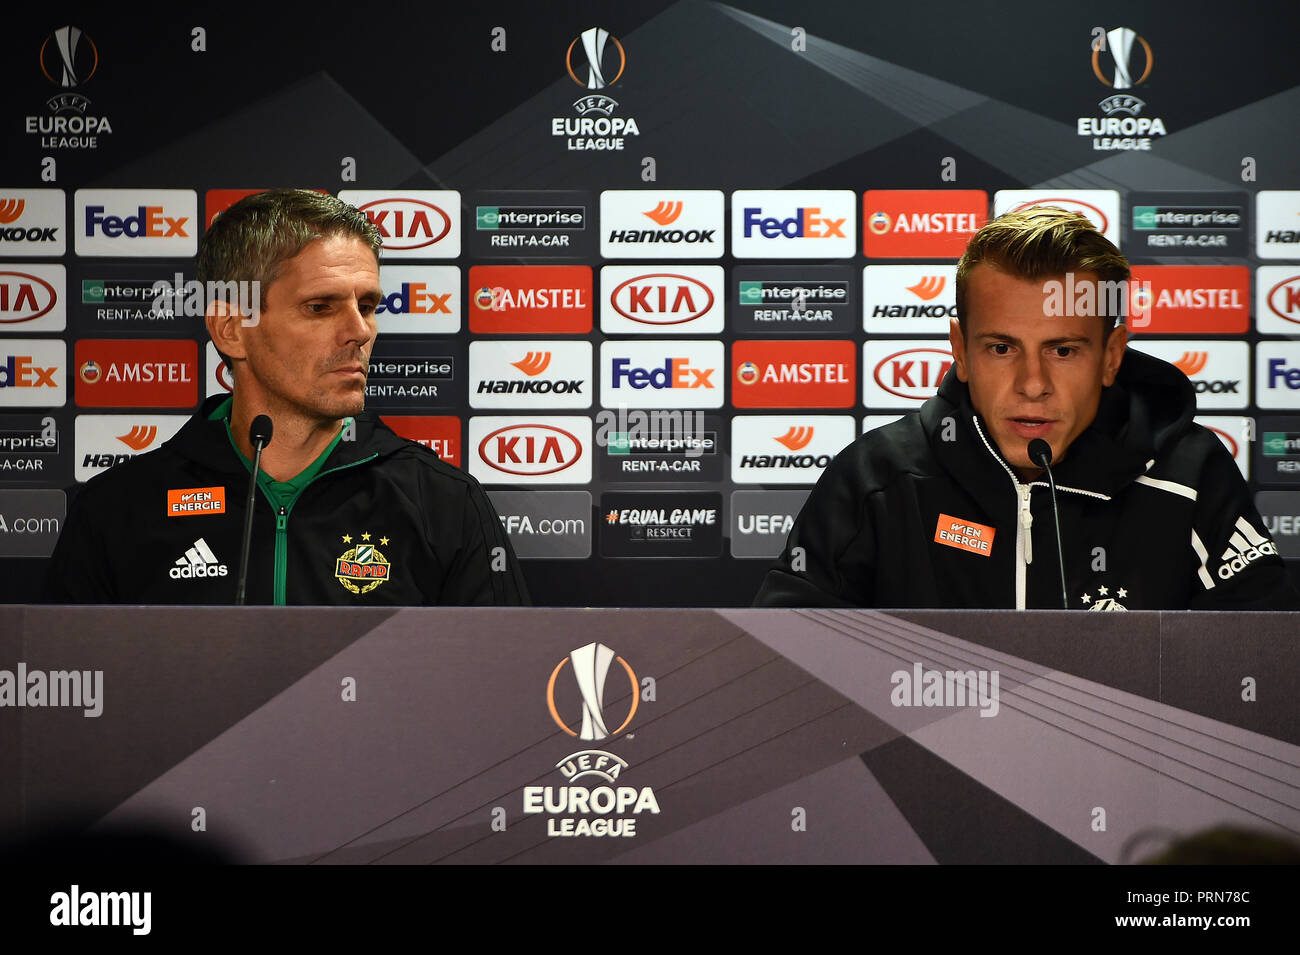 Glasgow, Scotland. Wednesday 3rd October 2018.   Rapid Wein manager Dietmar Kühbauer and club captain Stefan Schwab address the media at a press conference ahead of their Europa League Matchday 2 match against Glasgow Rangers at Ibrox Stadium, Glasgow, Scotland on Wednesday 3rd October 2018 2018.   Picture Andy Buchanan Credit: Andy Buchanan/Alamy Live News Stock Photo